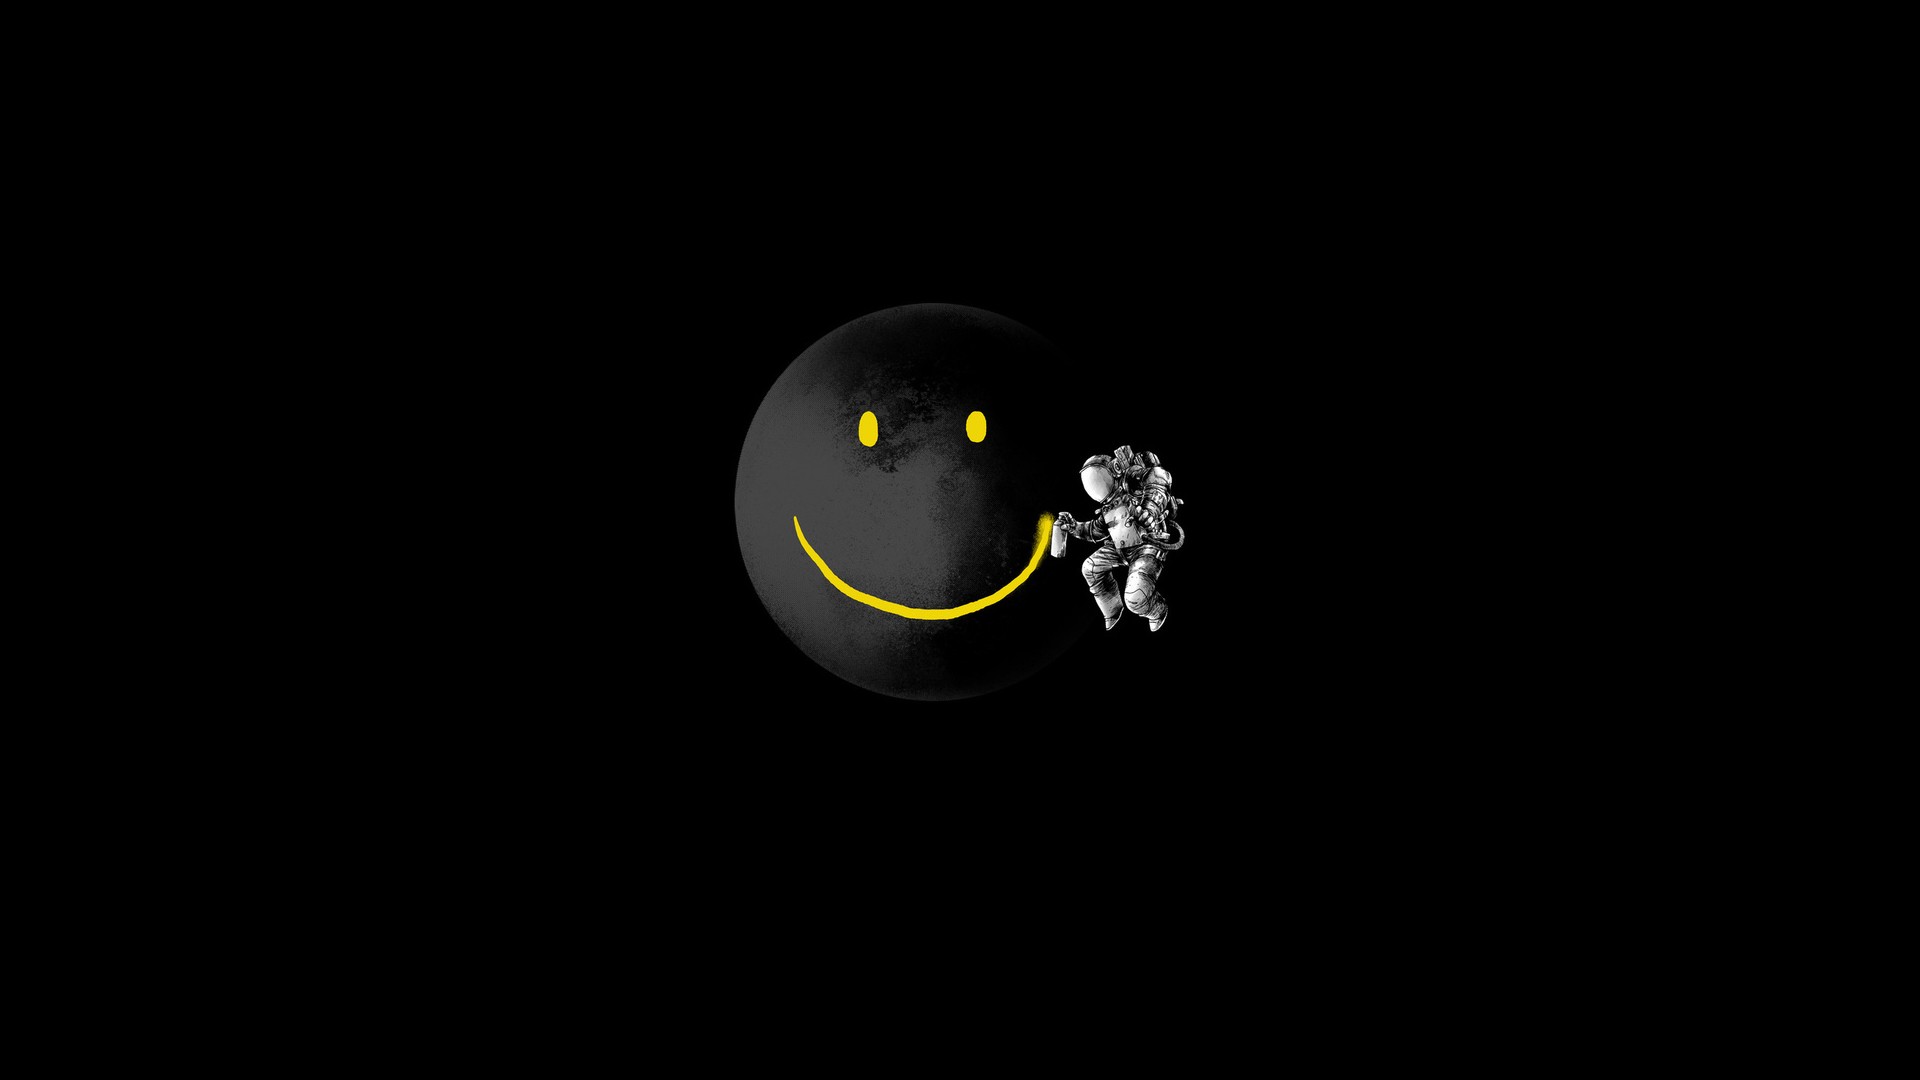 Smiley Face Spaceman Black Background 1920A wallpaper background